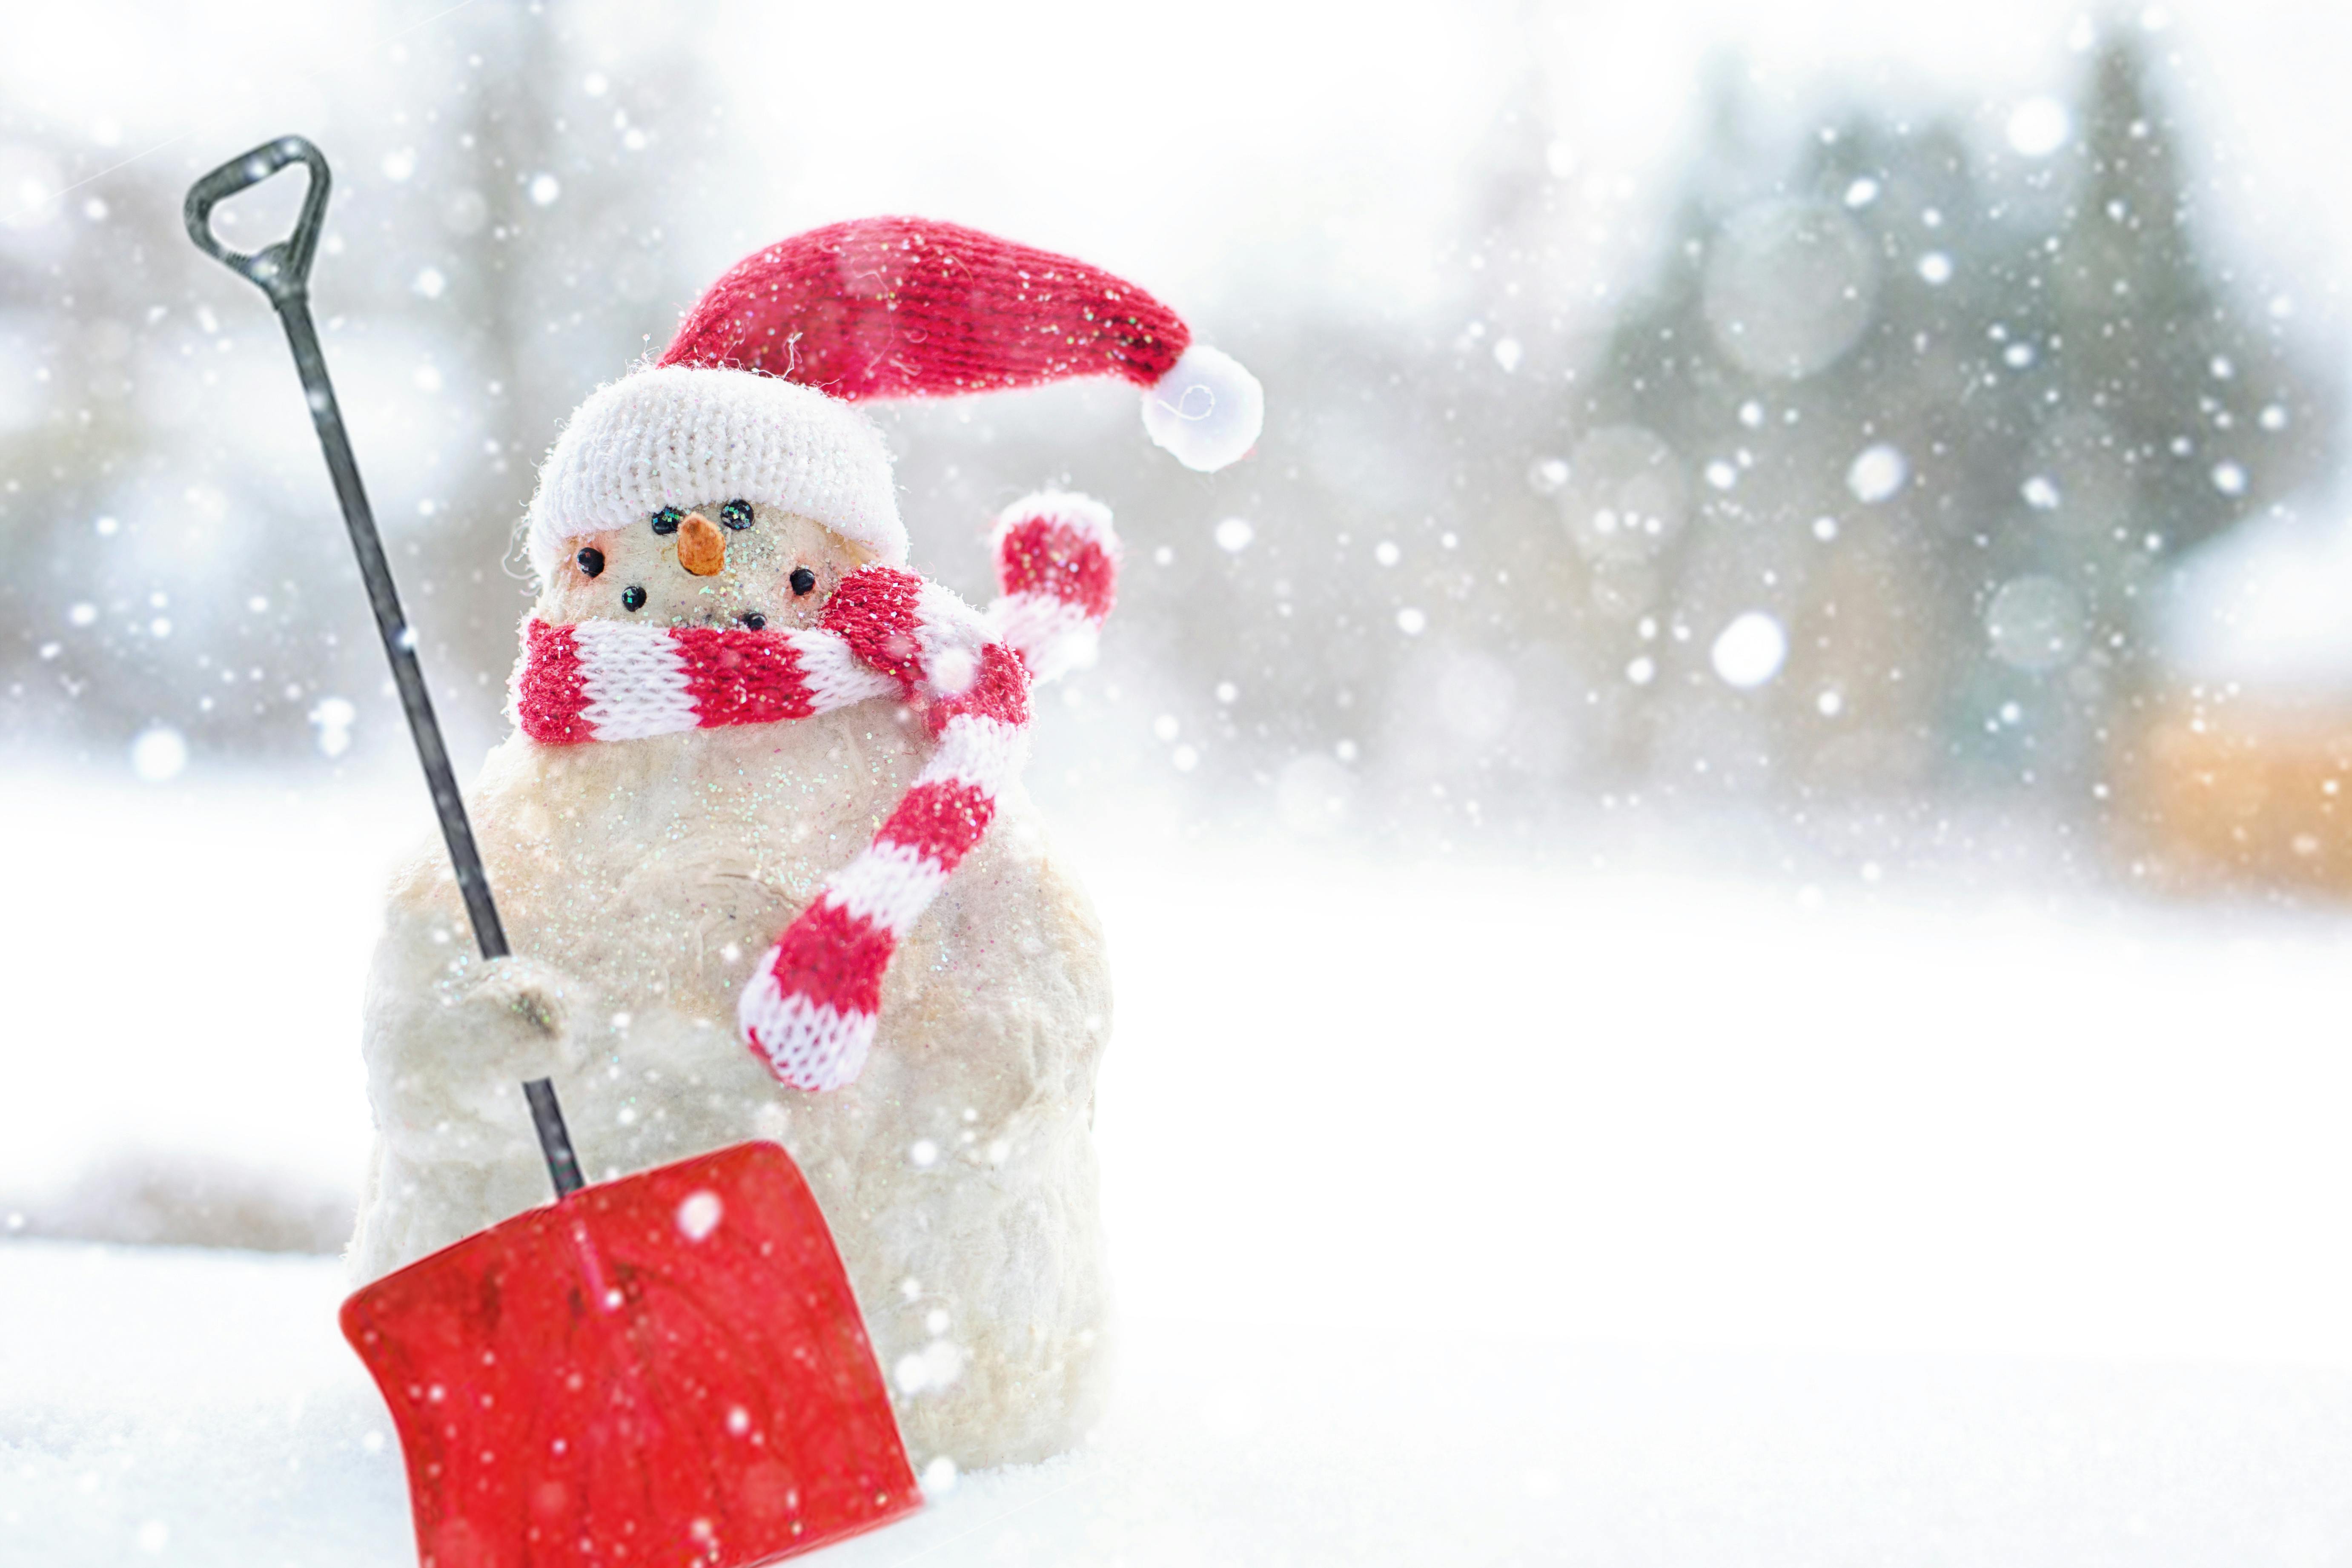 1,000+ Best Snowman Pictures for Free [HD] - Pixabay